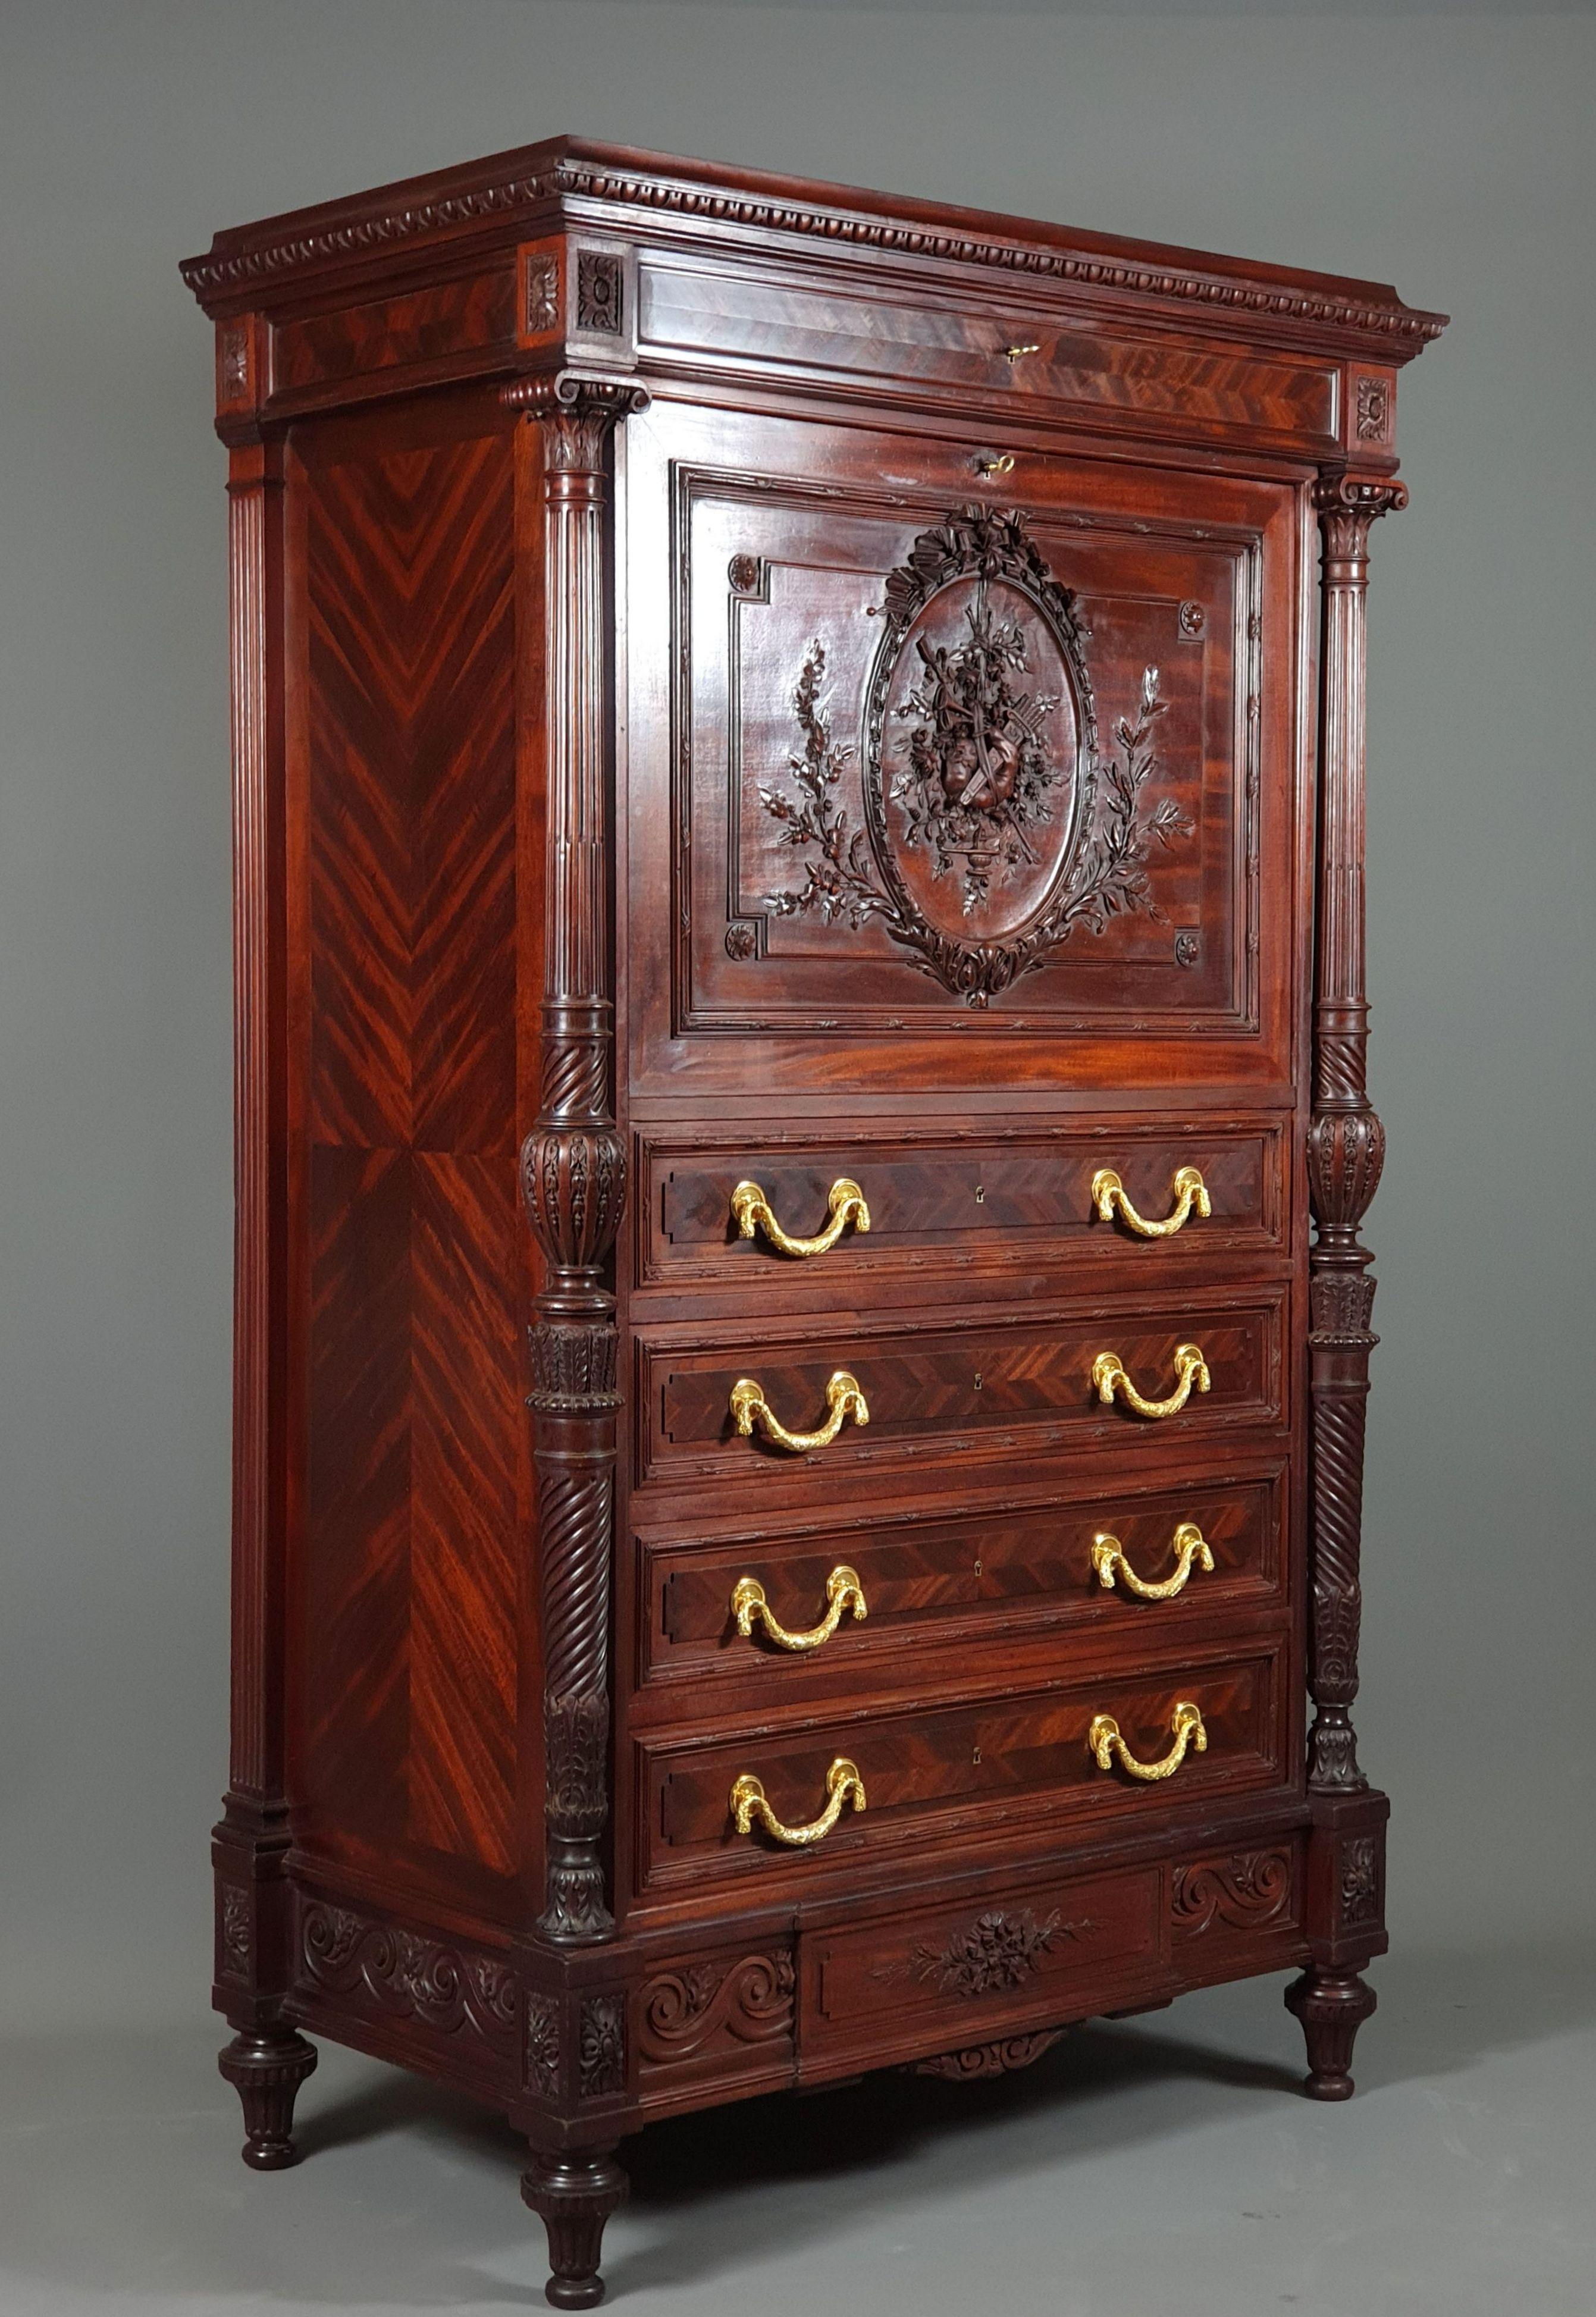 Gustave-Frédéric Quignon

Superb Louis XVI style piece of furniture in very finely carved solid mahogany forming a secretary / document holder cabinet.
Opening 6 drawers including a secret one at the bottom, and a central flap revealing an inlaid